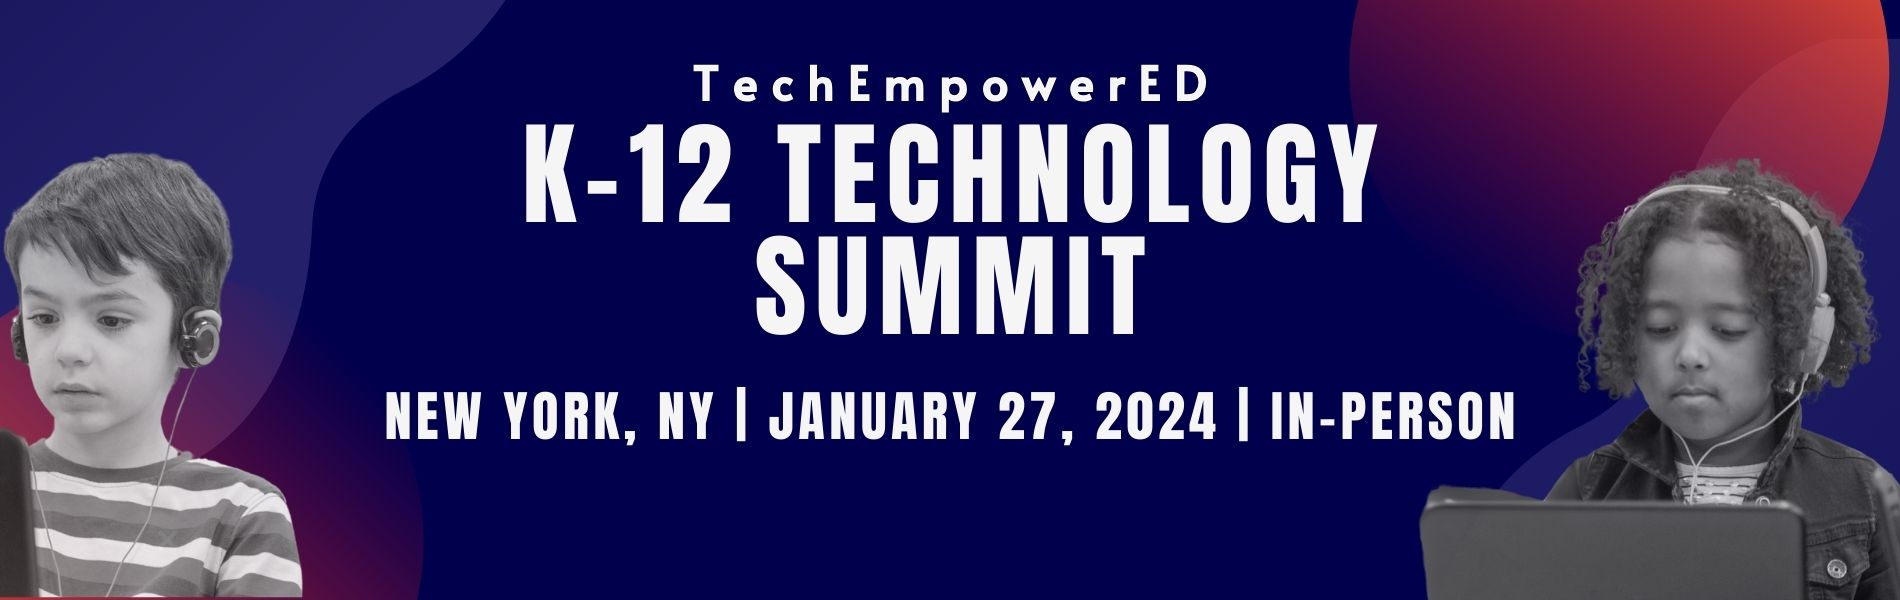 K-12 TECHNOLOGY-SUMMIT, IT Services for K-12 Schools